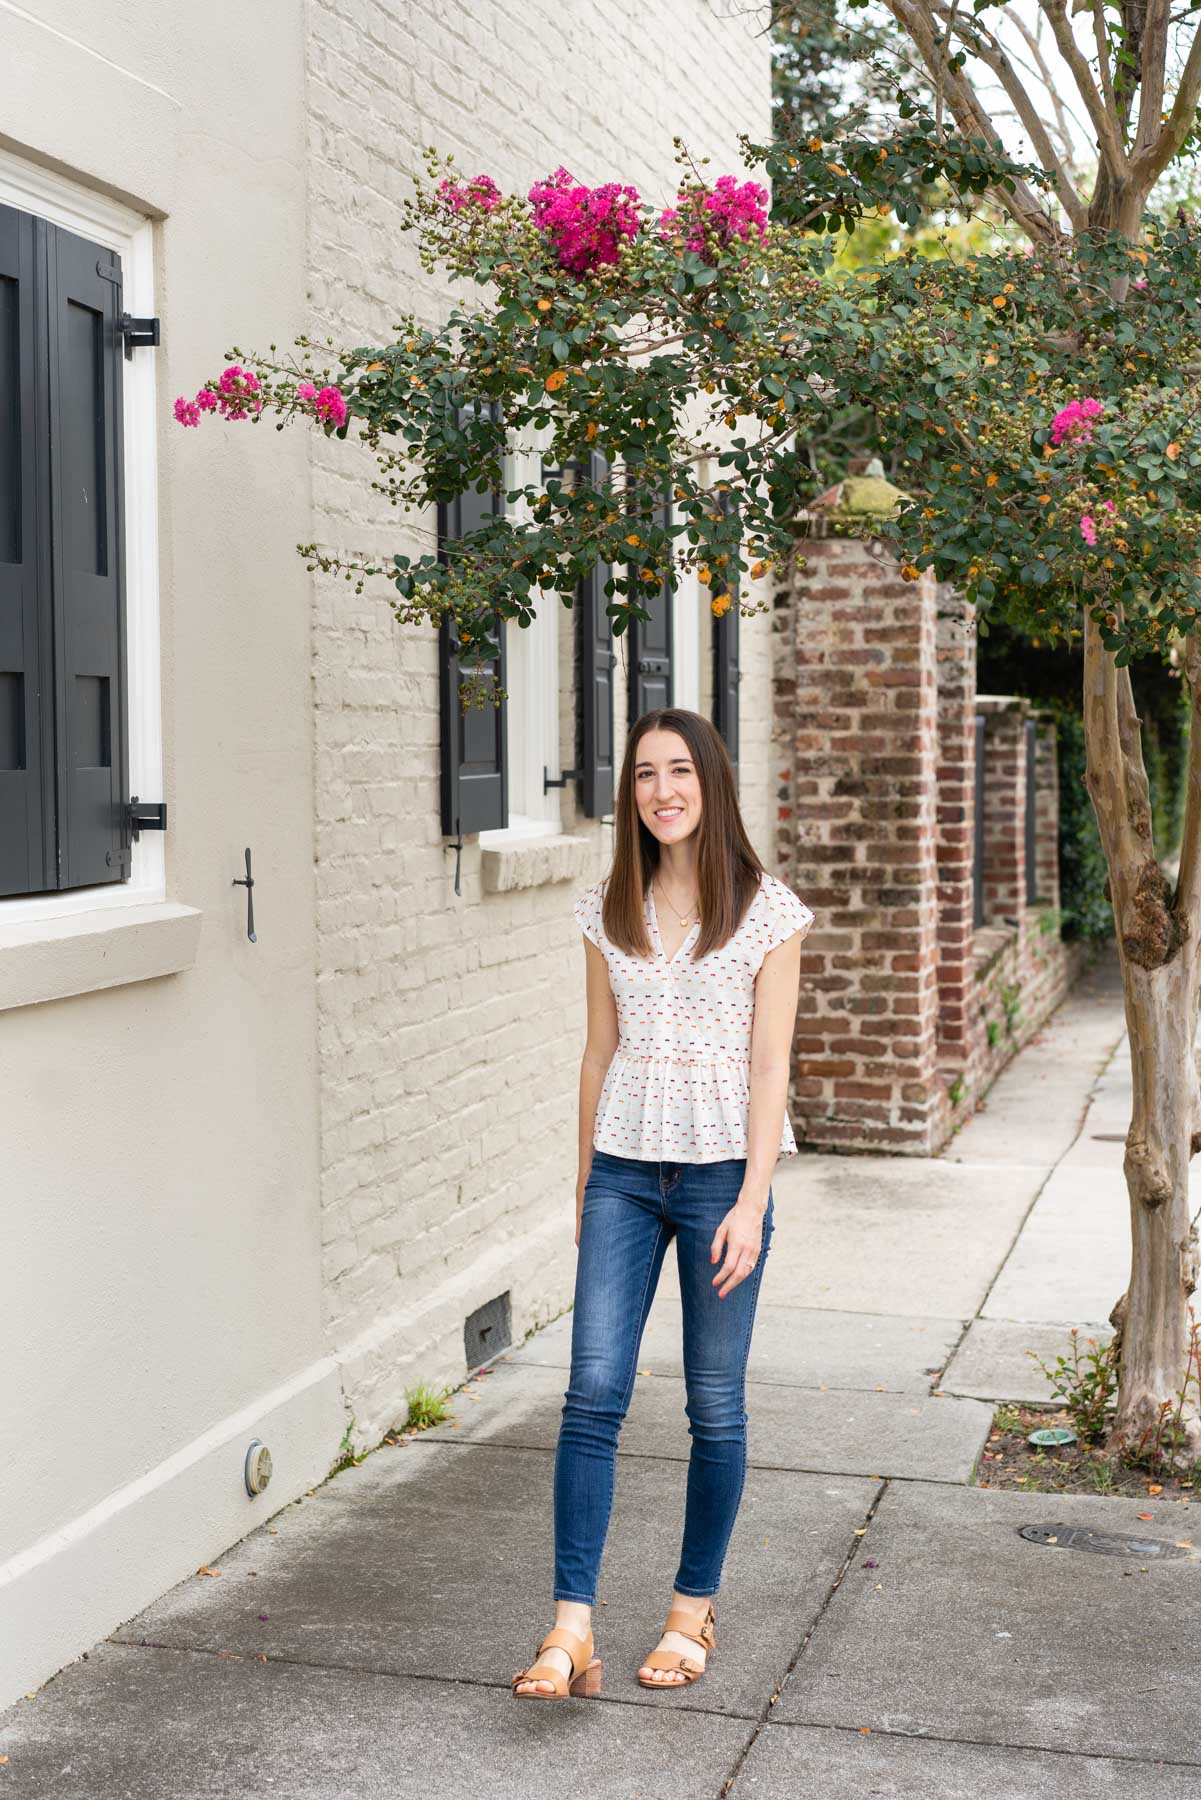 Woman in denim jeans and a white blouse walking down a sidewalk demonstrating how not to pose for a photoshoot by looking too stiff and robotic